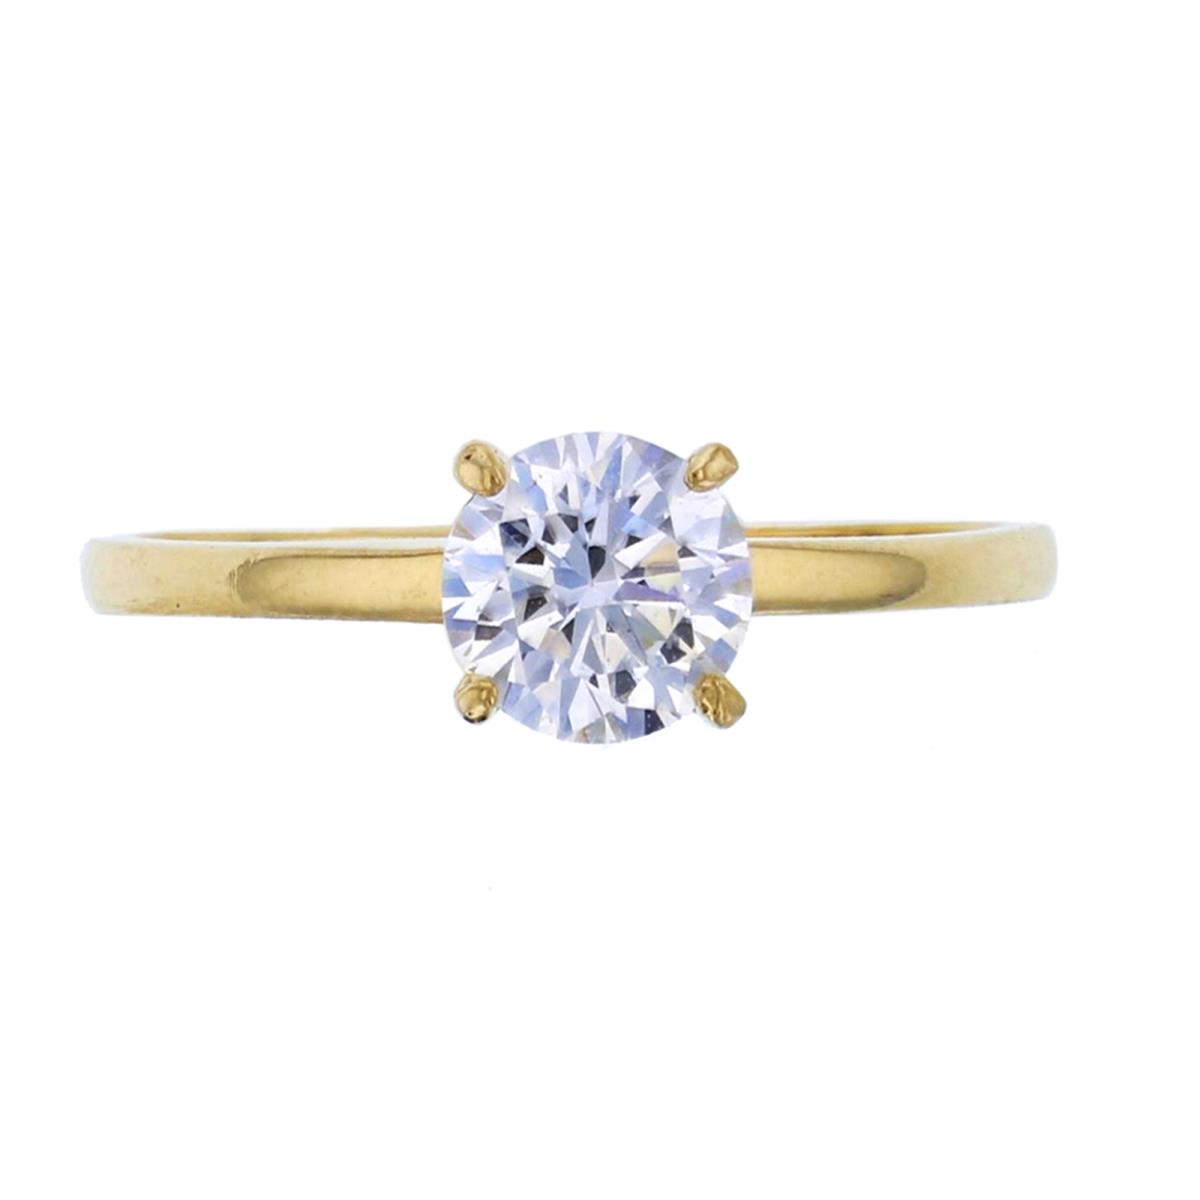 10K Yellow Gold 6.00mm Round Cut 4-Prong Peg Head CZ Solitaire Engagement Ring